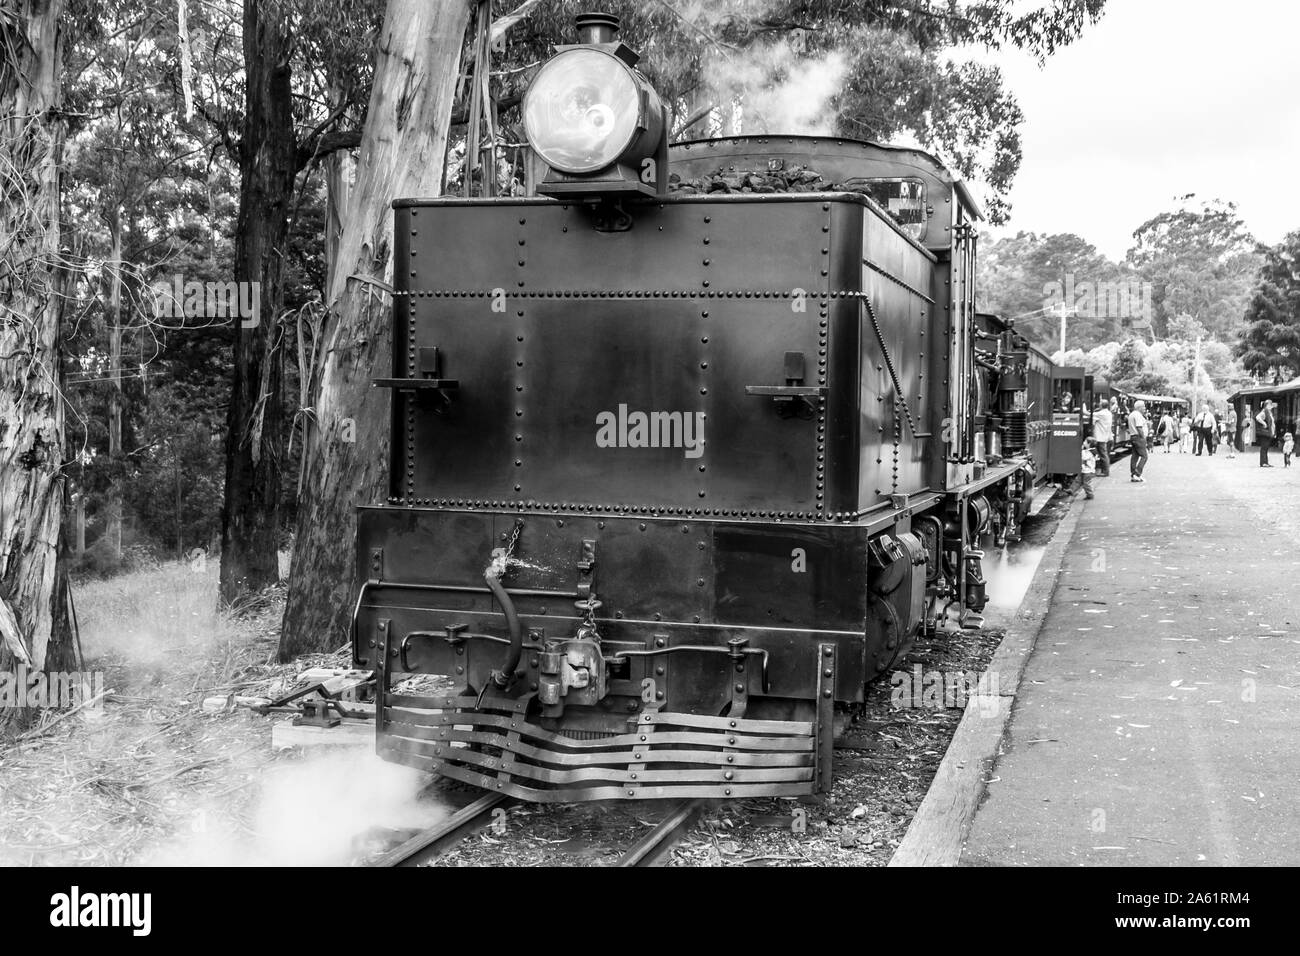 Melbourne, Australia - January 7, 2009: Puffing Billy steam train on the station. Historical narrow railway in the Dandenong Ranges near Melbourne. Stock Photo